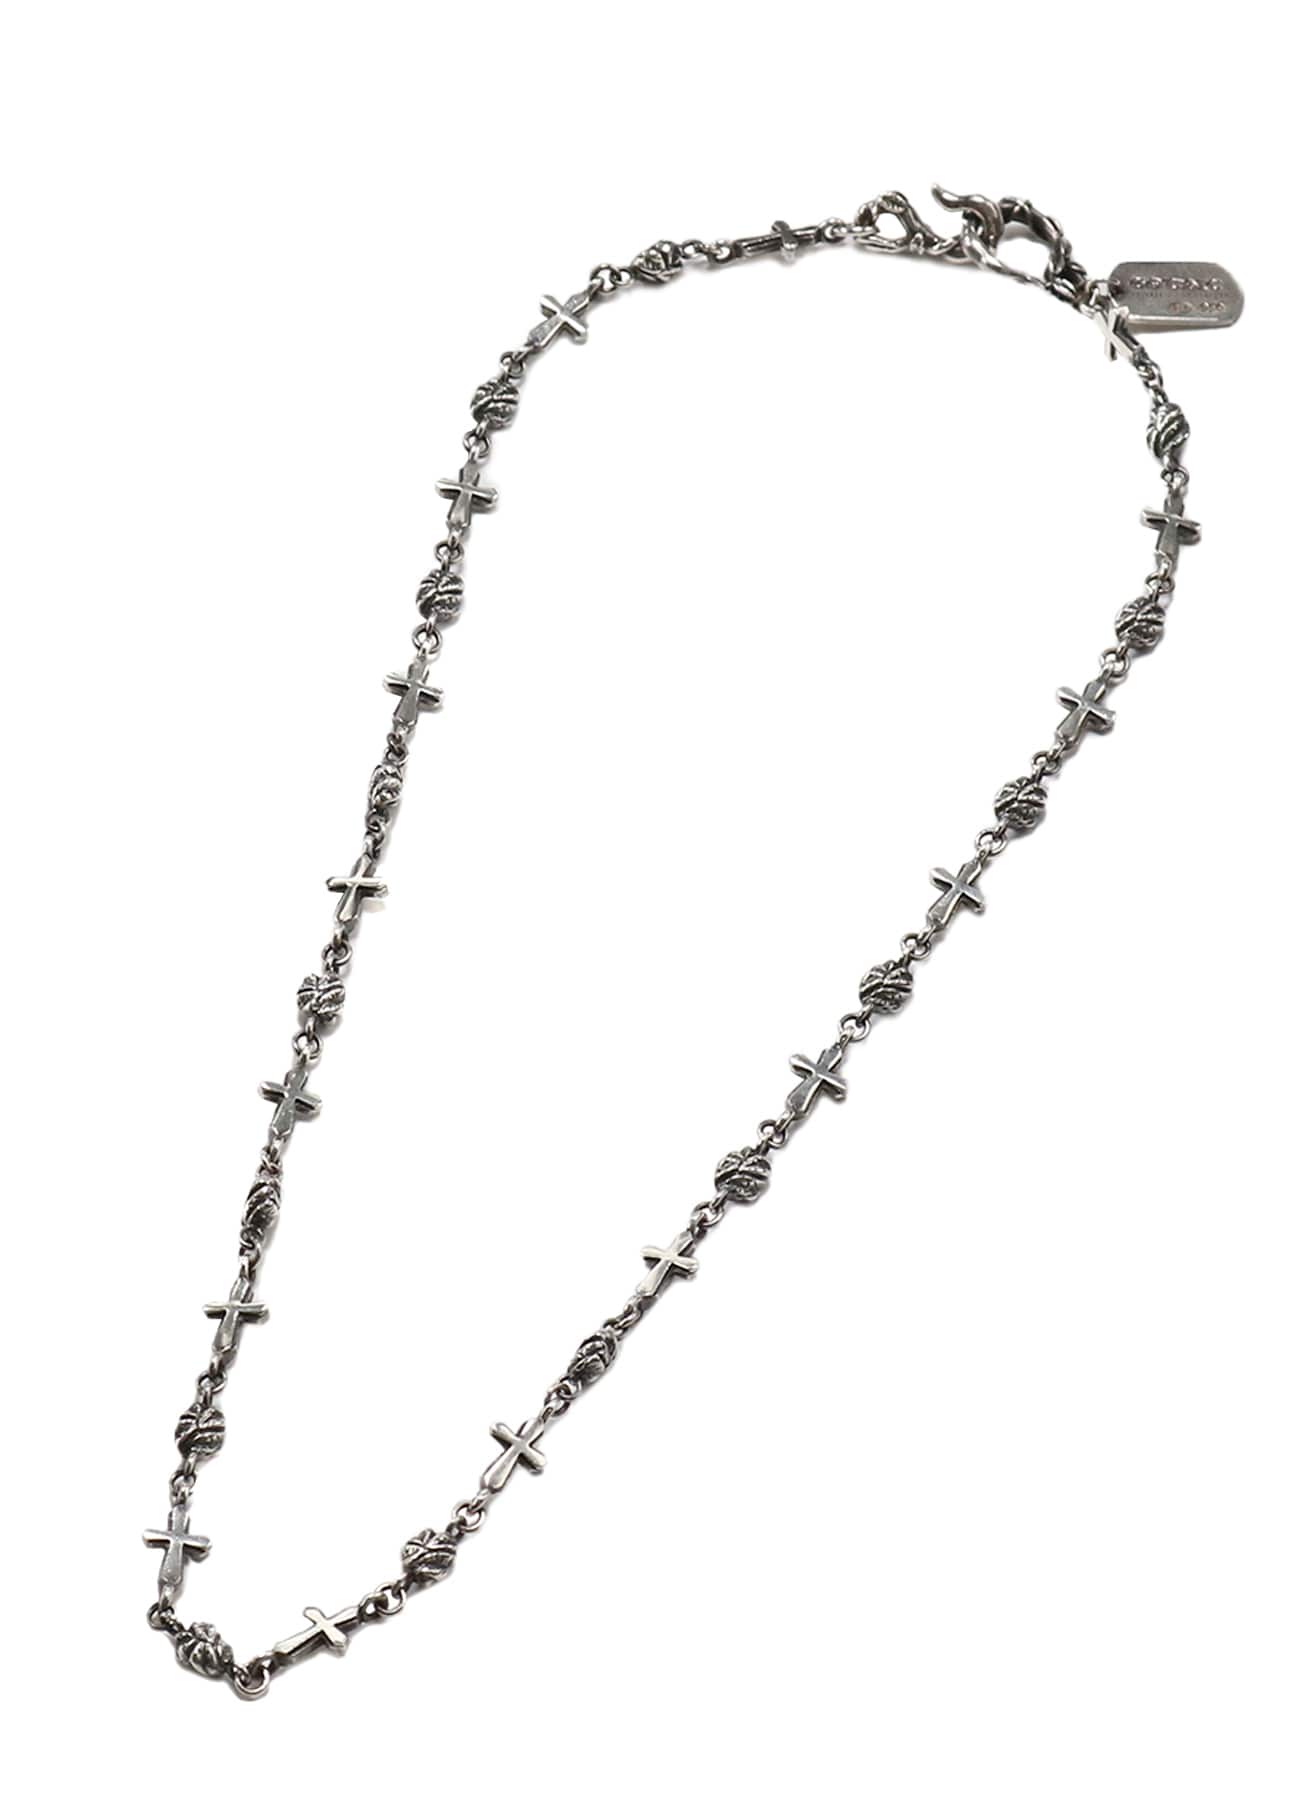 SILVER 950 GOTHIC CROSS CHAIN NECKLACE